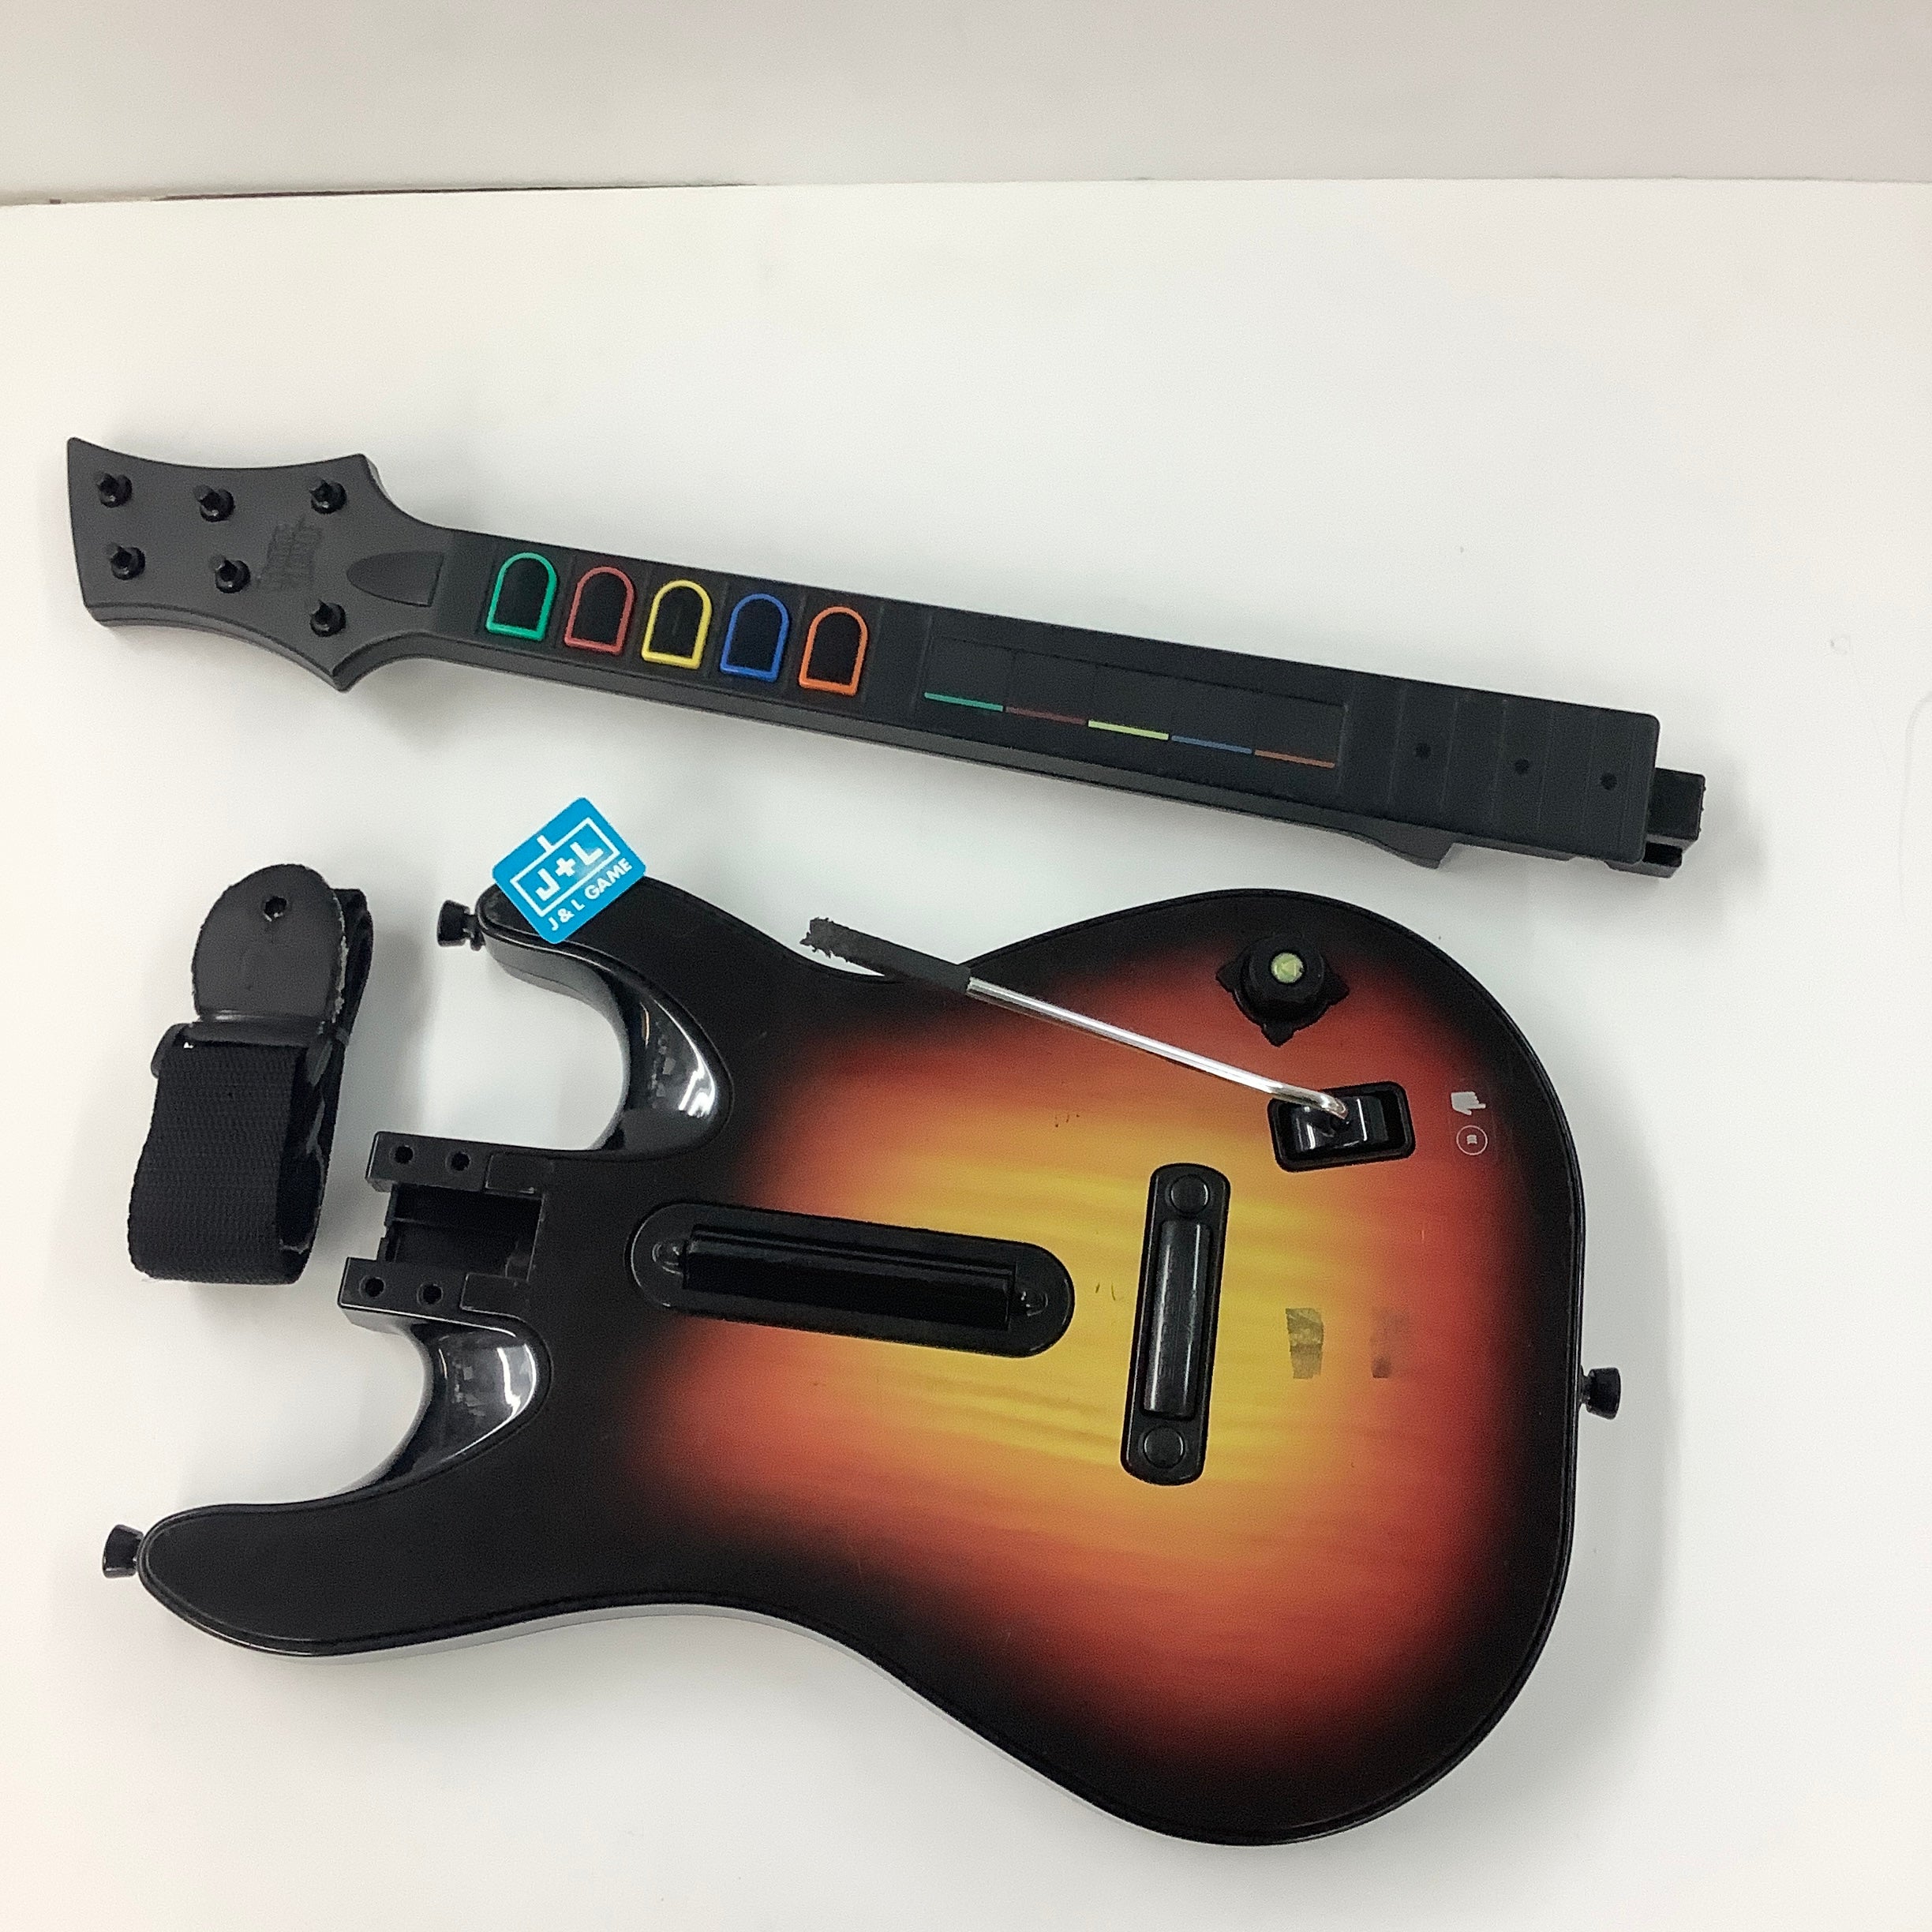 Guitar Hero Wireless Guitar Controller (Red Octane) - Xbox 360 [Pre-Owned] Accessories J&L Video Games New York City   